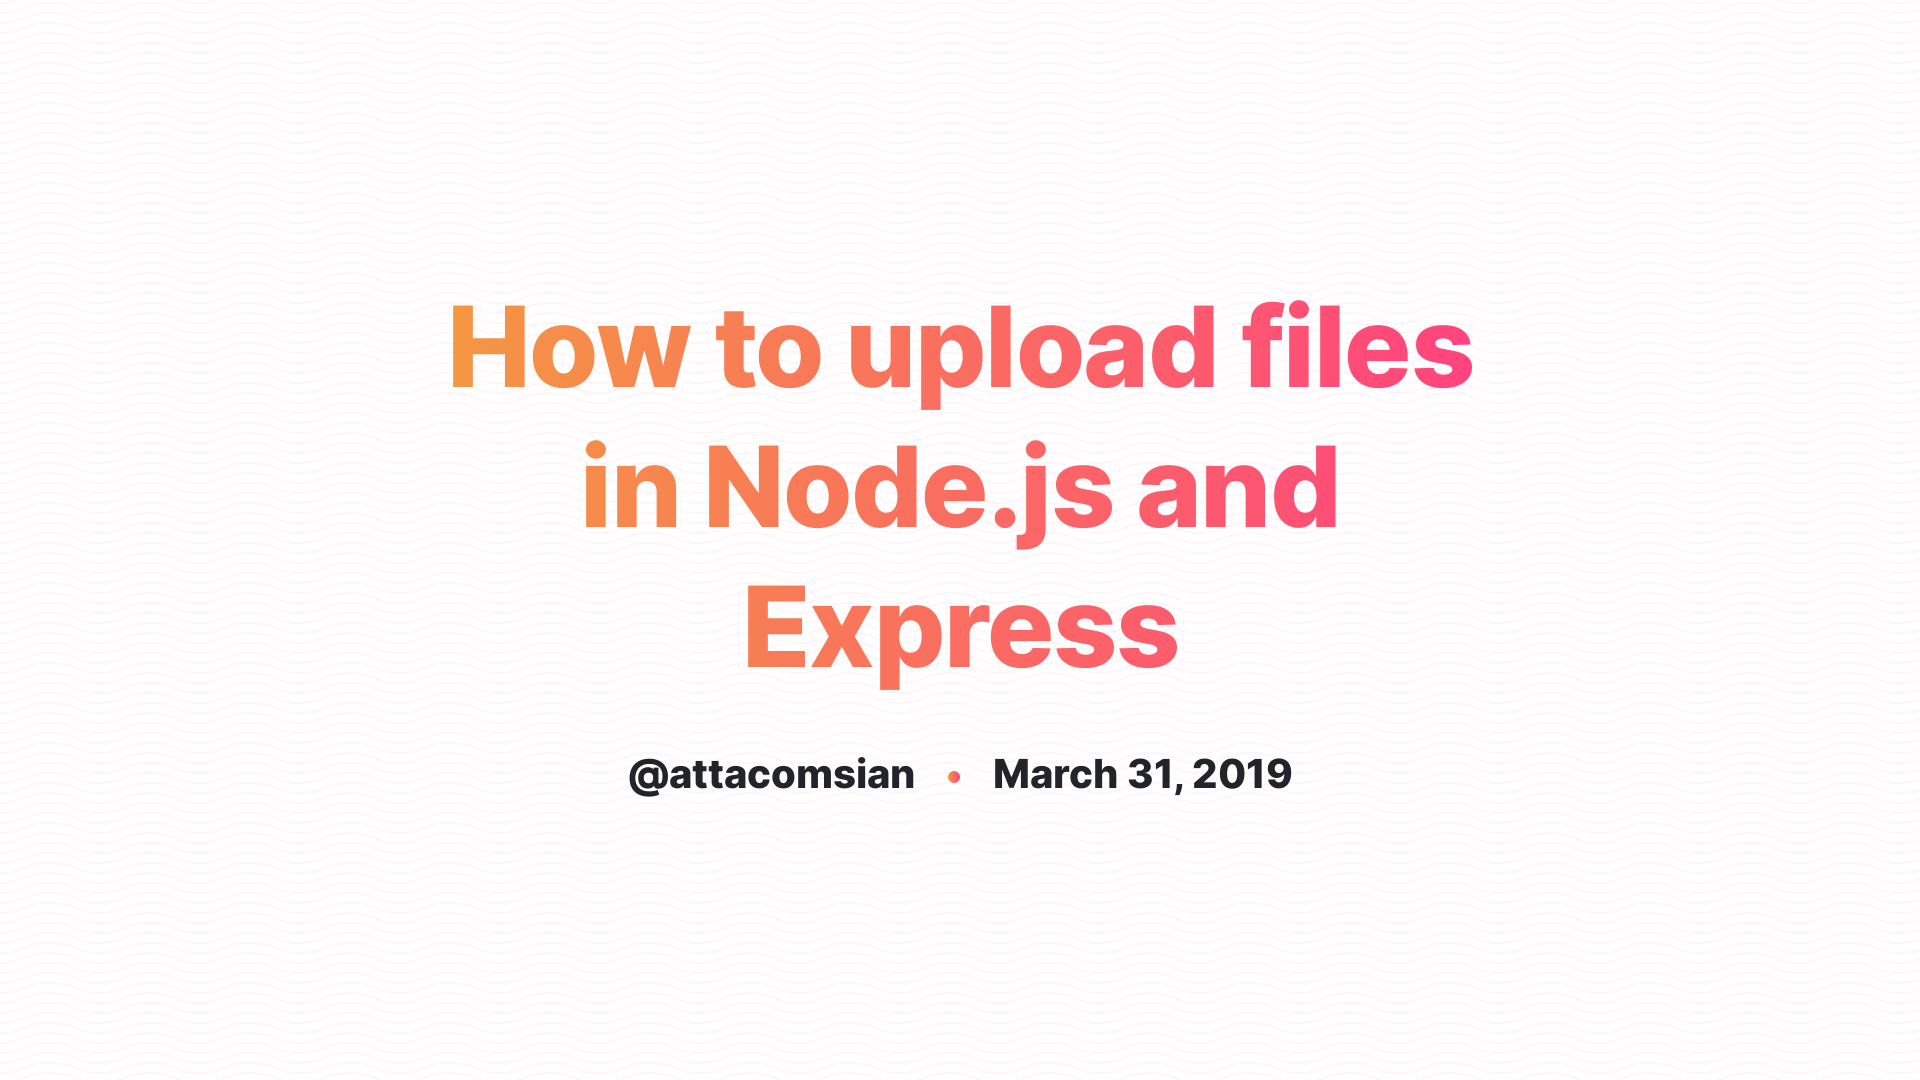 How to upload files in Node.js and Express